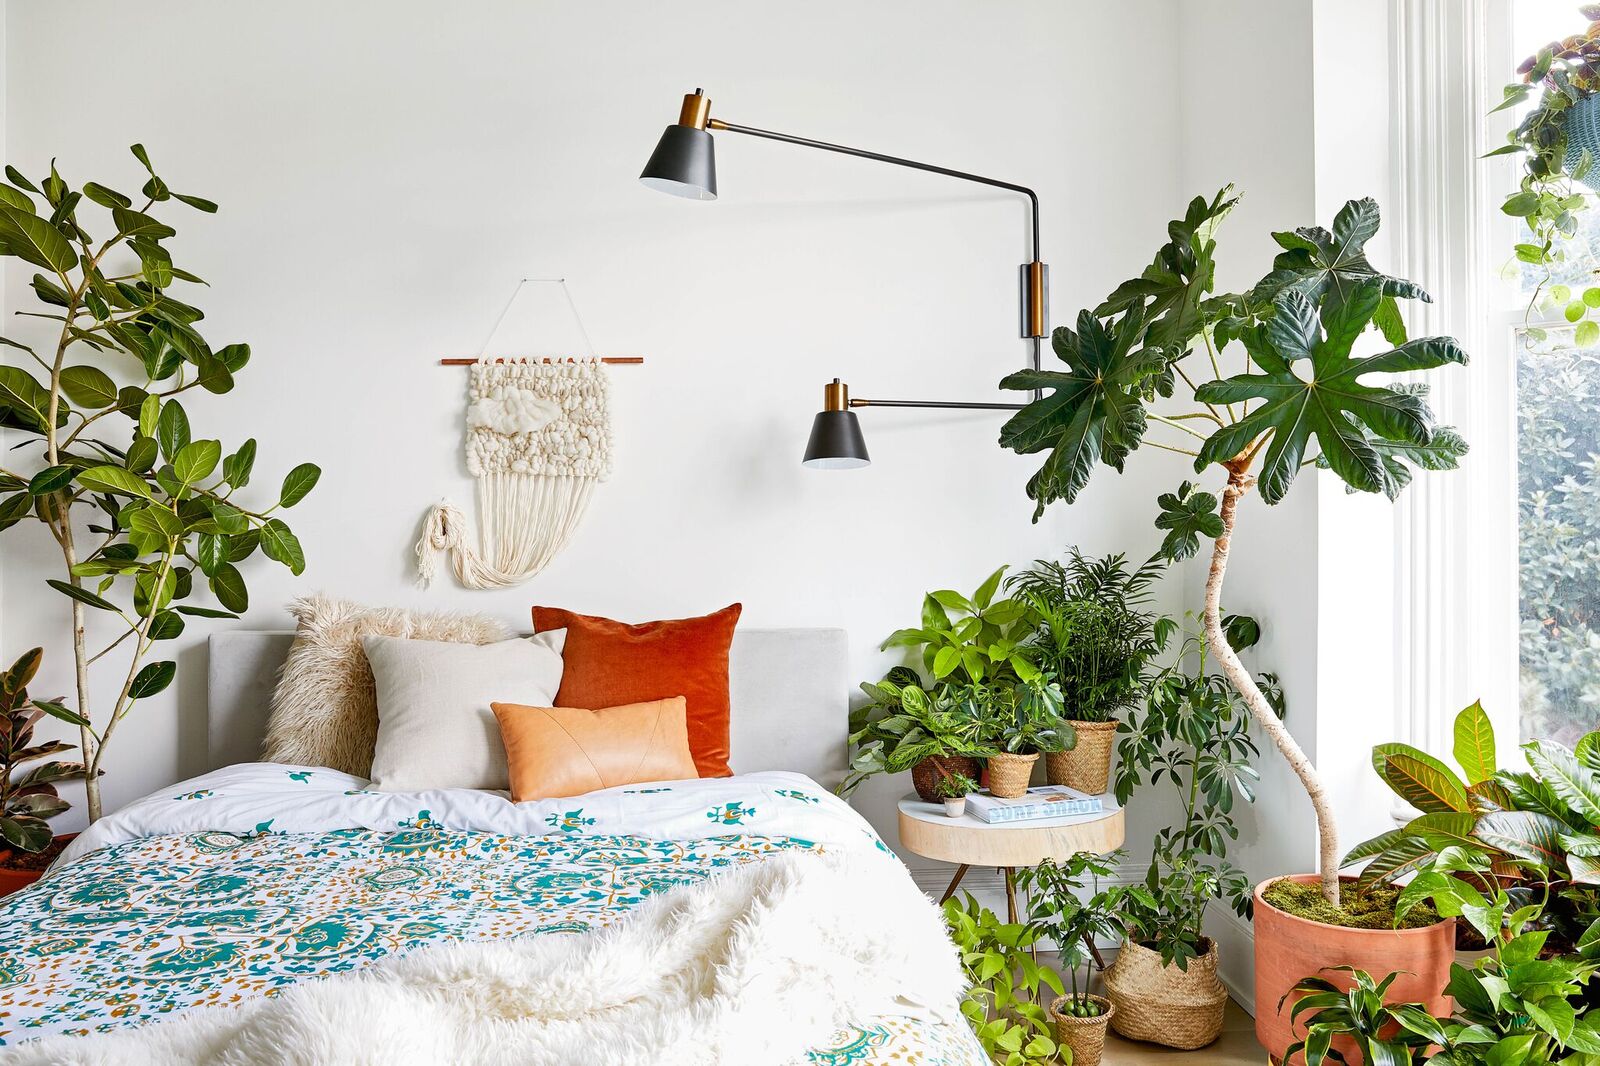 Bedroom decorated with lots of houseplants